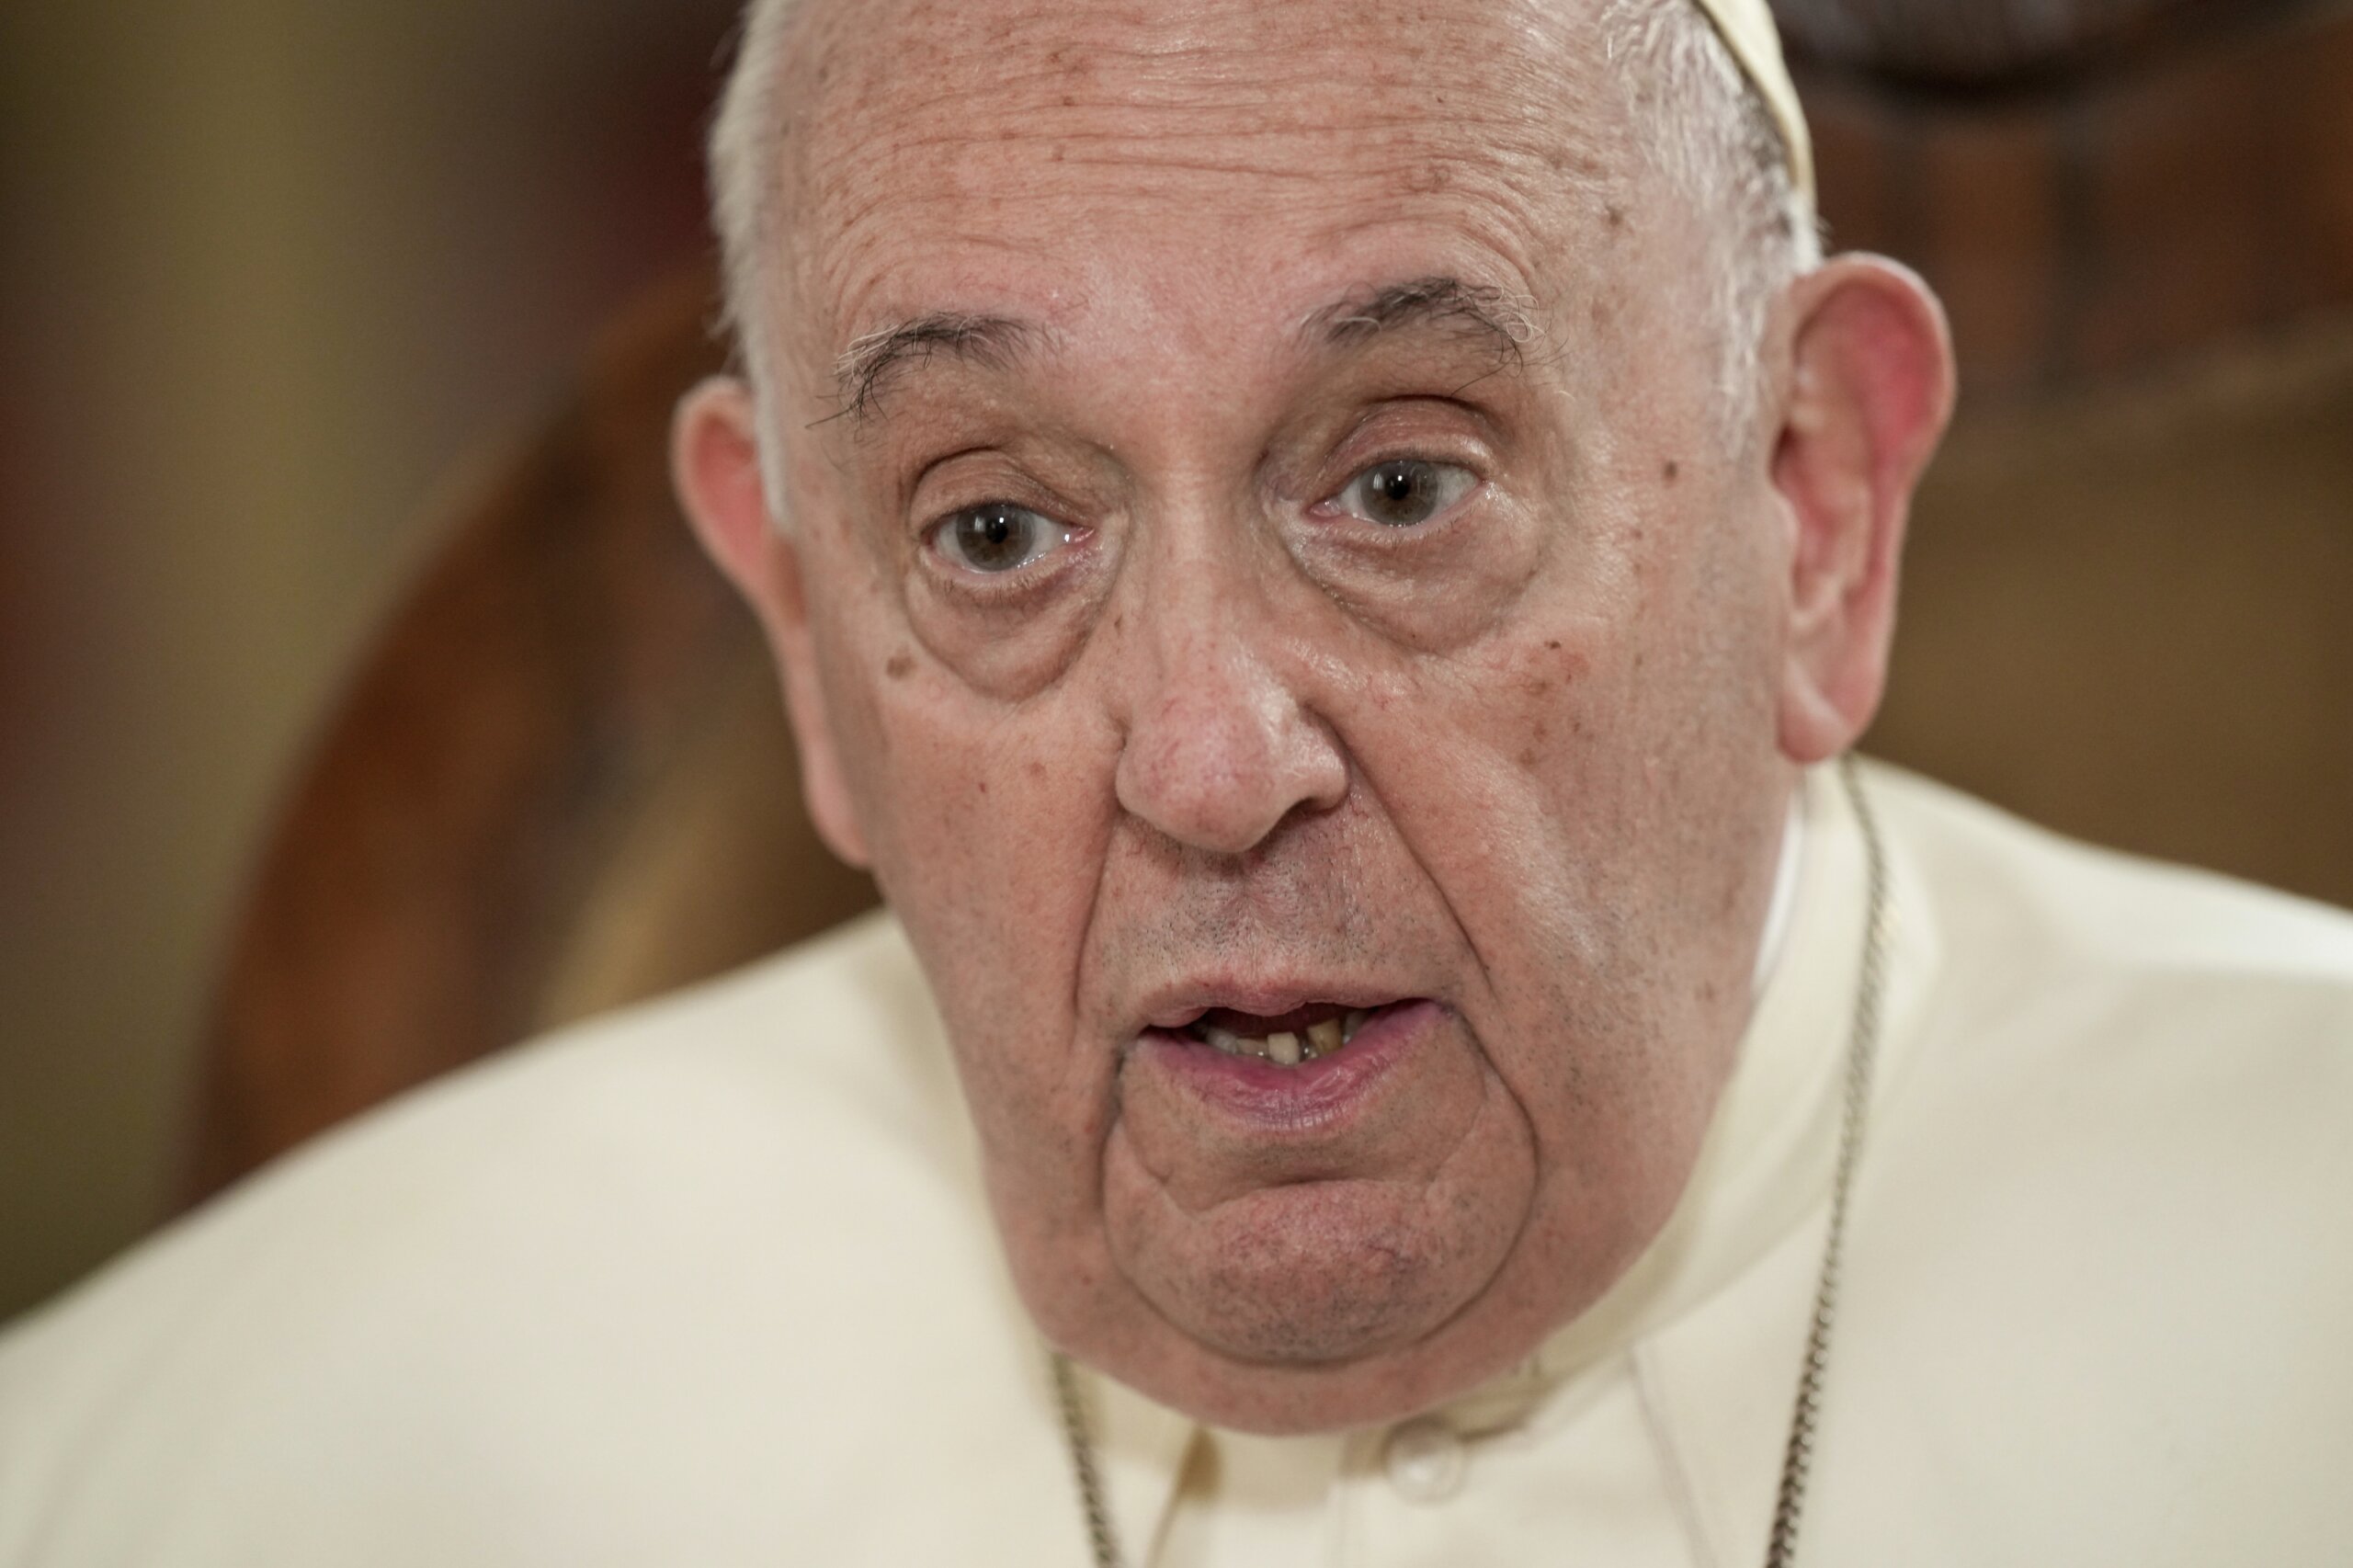 The AP Interview Takeaways: The Pope on “patience” in China